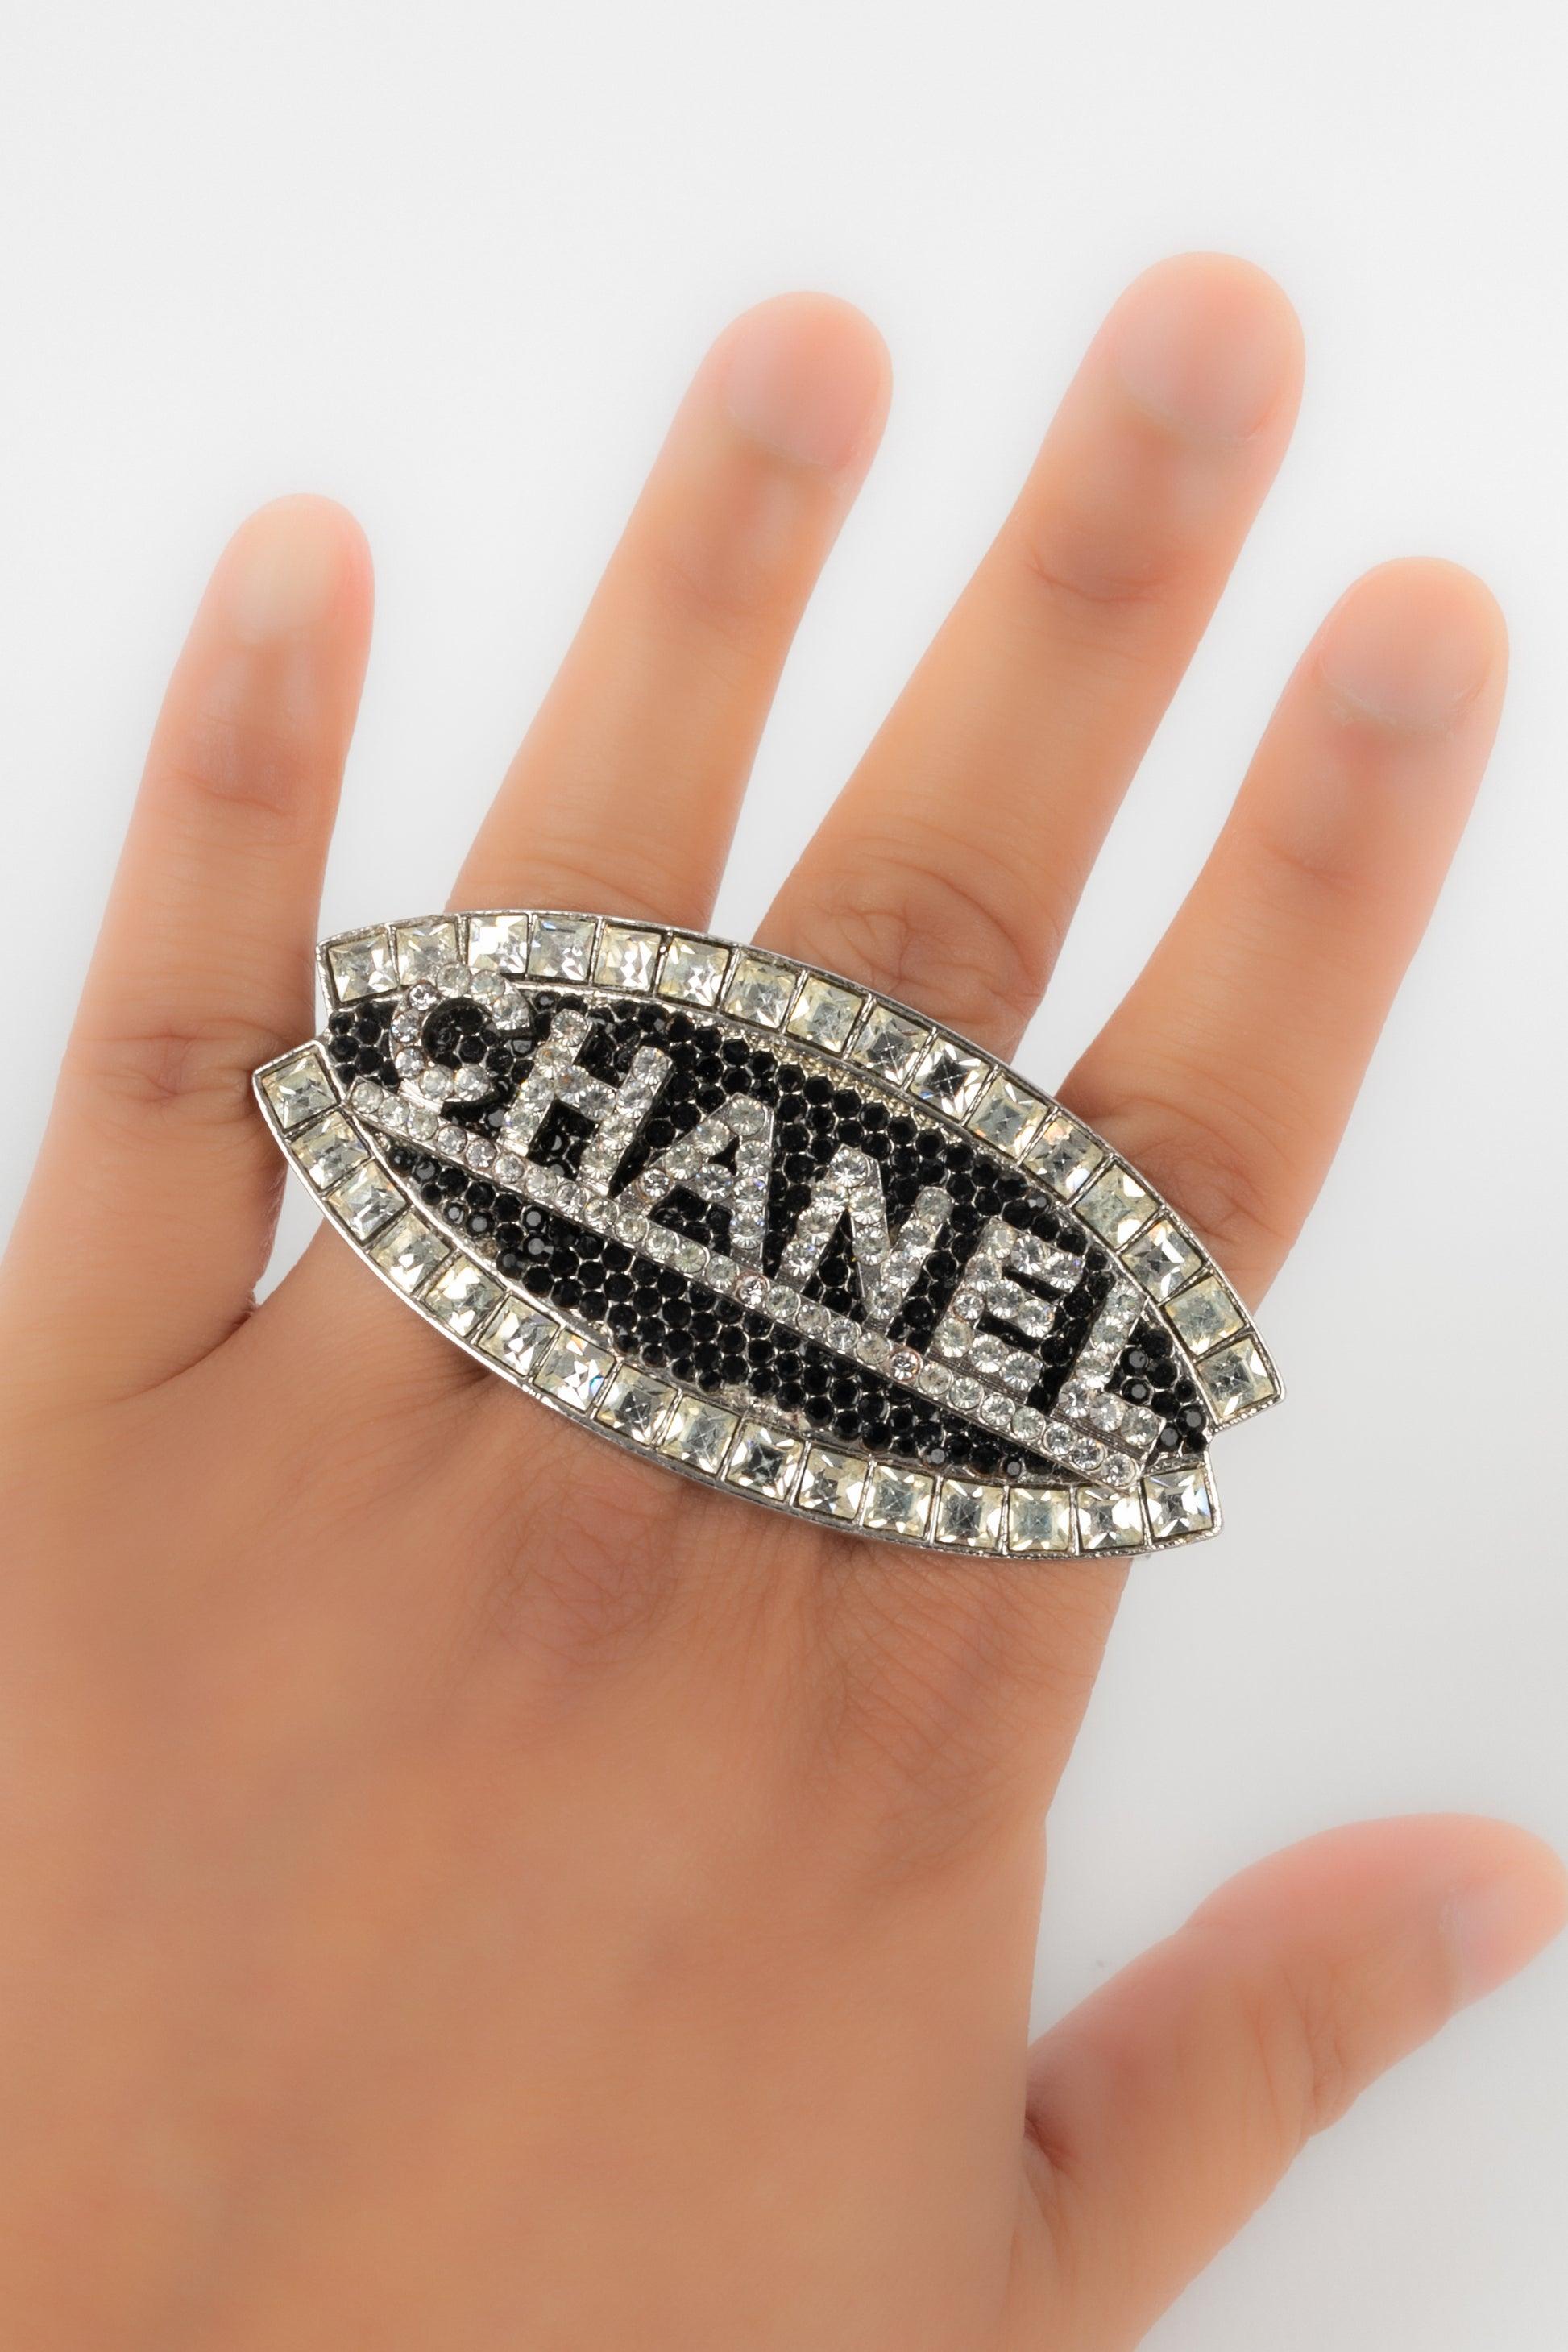 Chanel - (Made in France) Golden metal ring ornamented with rhinestones. Size 56 and 58. Fall-Winter 2003 Collection.

Additional information:
Condition: Very good condition
Dimensions: Length: 6.5 cm
Period: 21st Century

Seller Reference: ACC96